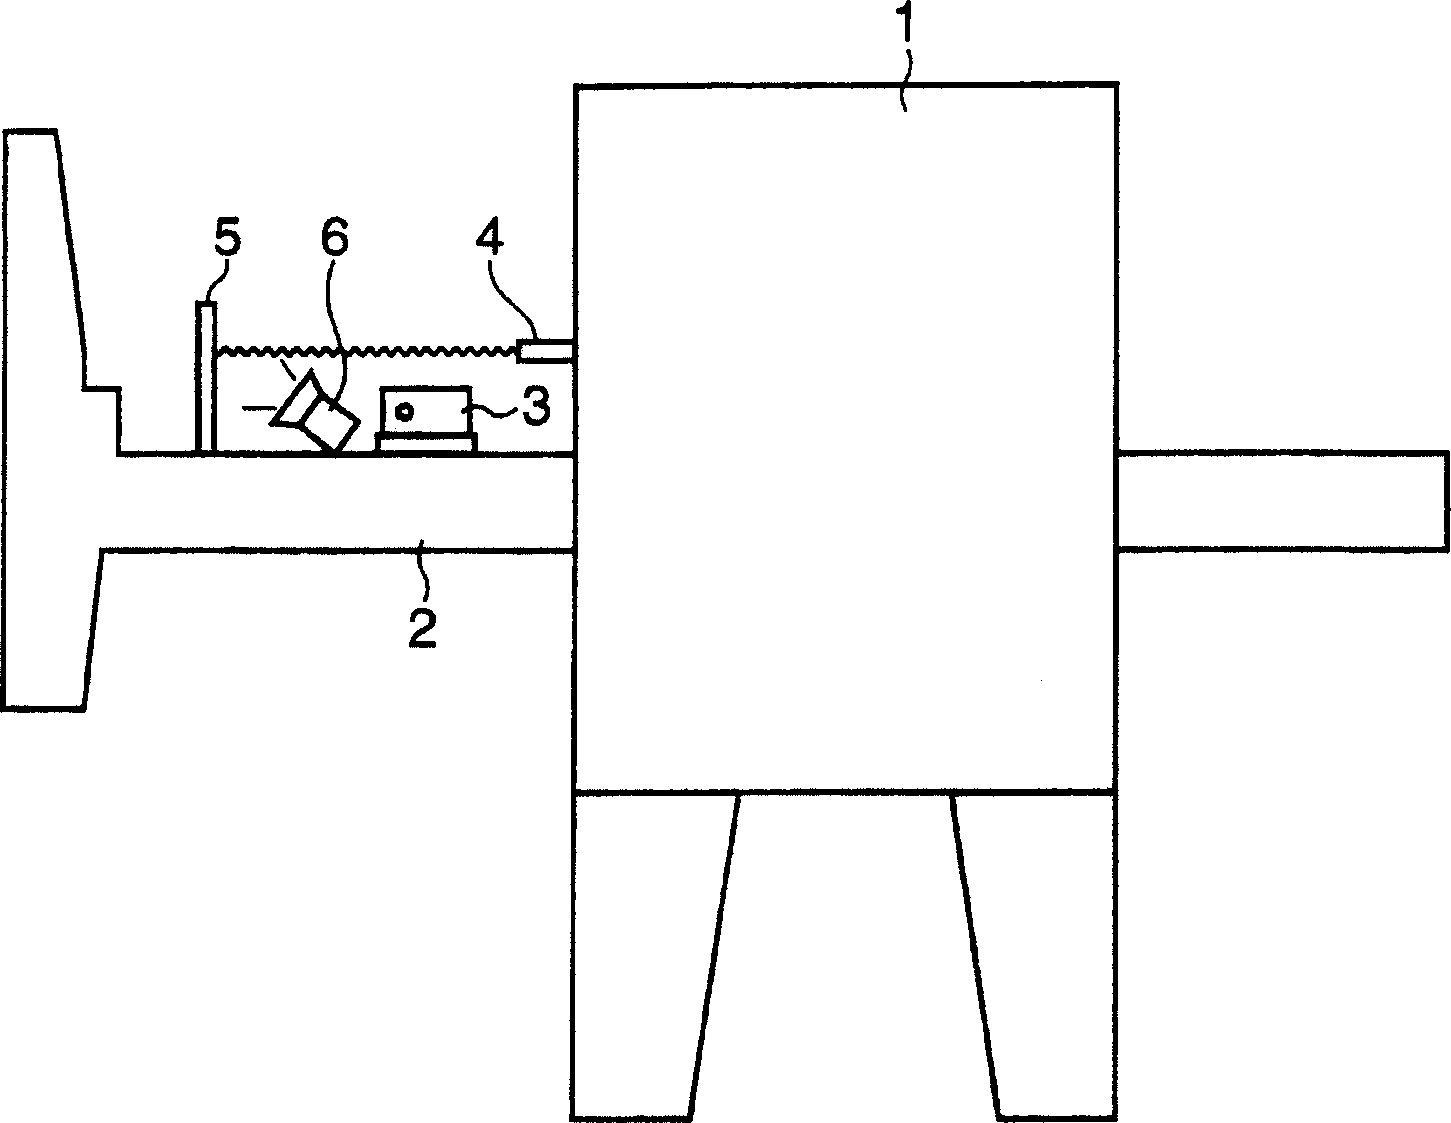 Device and method for diagnosing coke oven carbonizing chamber